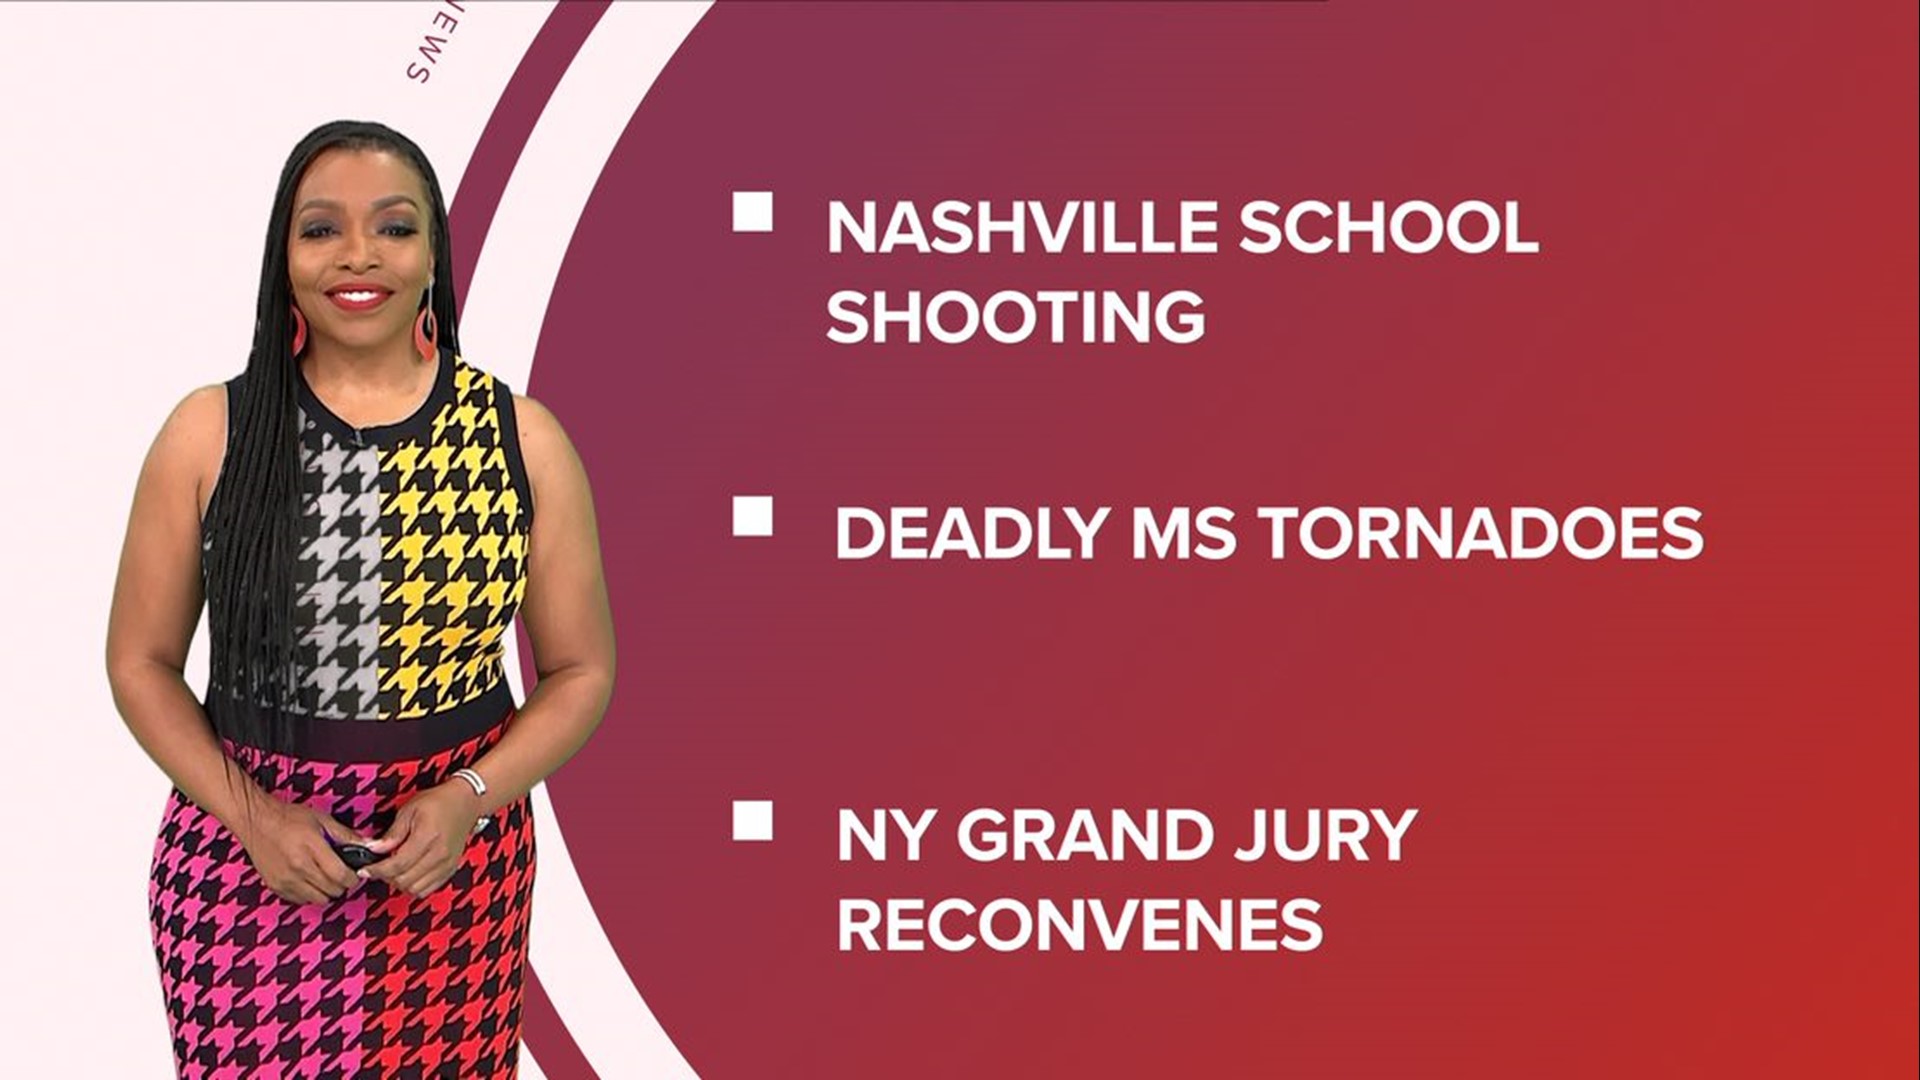 A look at what is happening in the news from a school shooting in Nashville to cleanup of deadly tornadoes in the South and a fishing tale comes to a close.